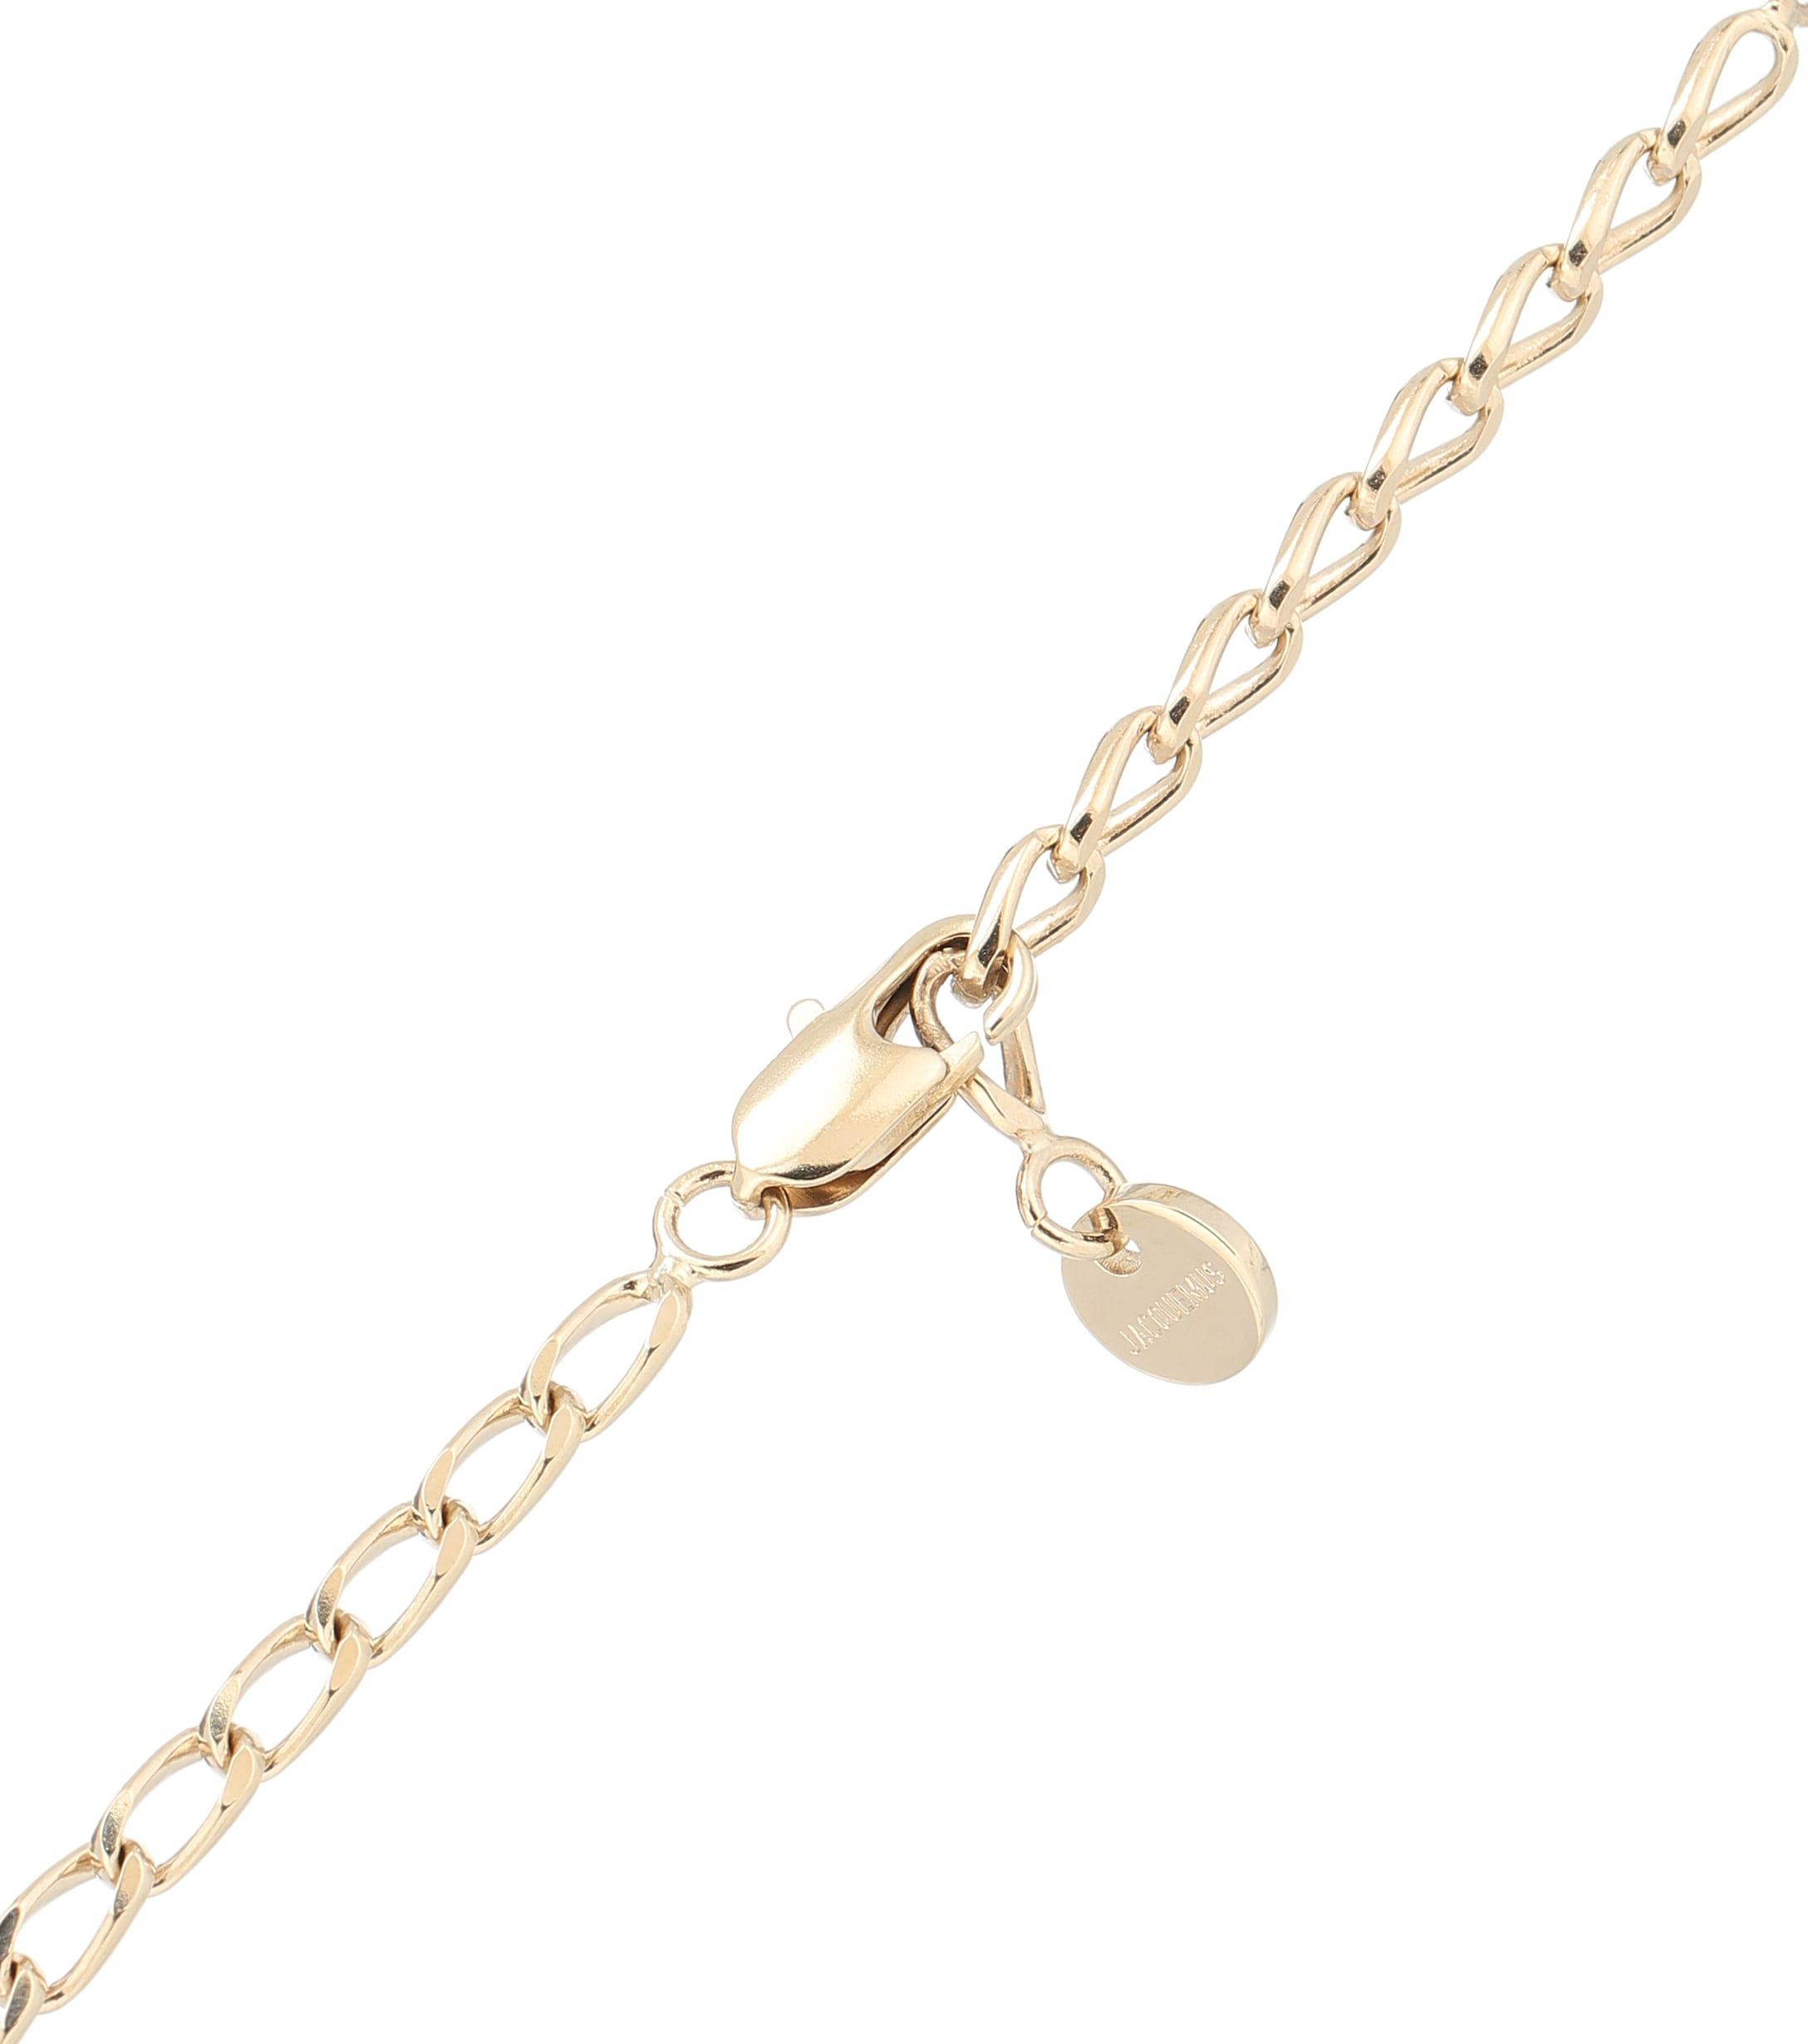 Jacquemus Le Collier Chiquito Necklace in Gold (Metallic) | Lyst